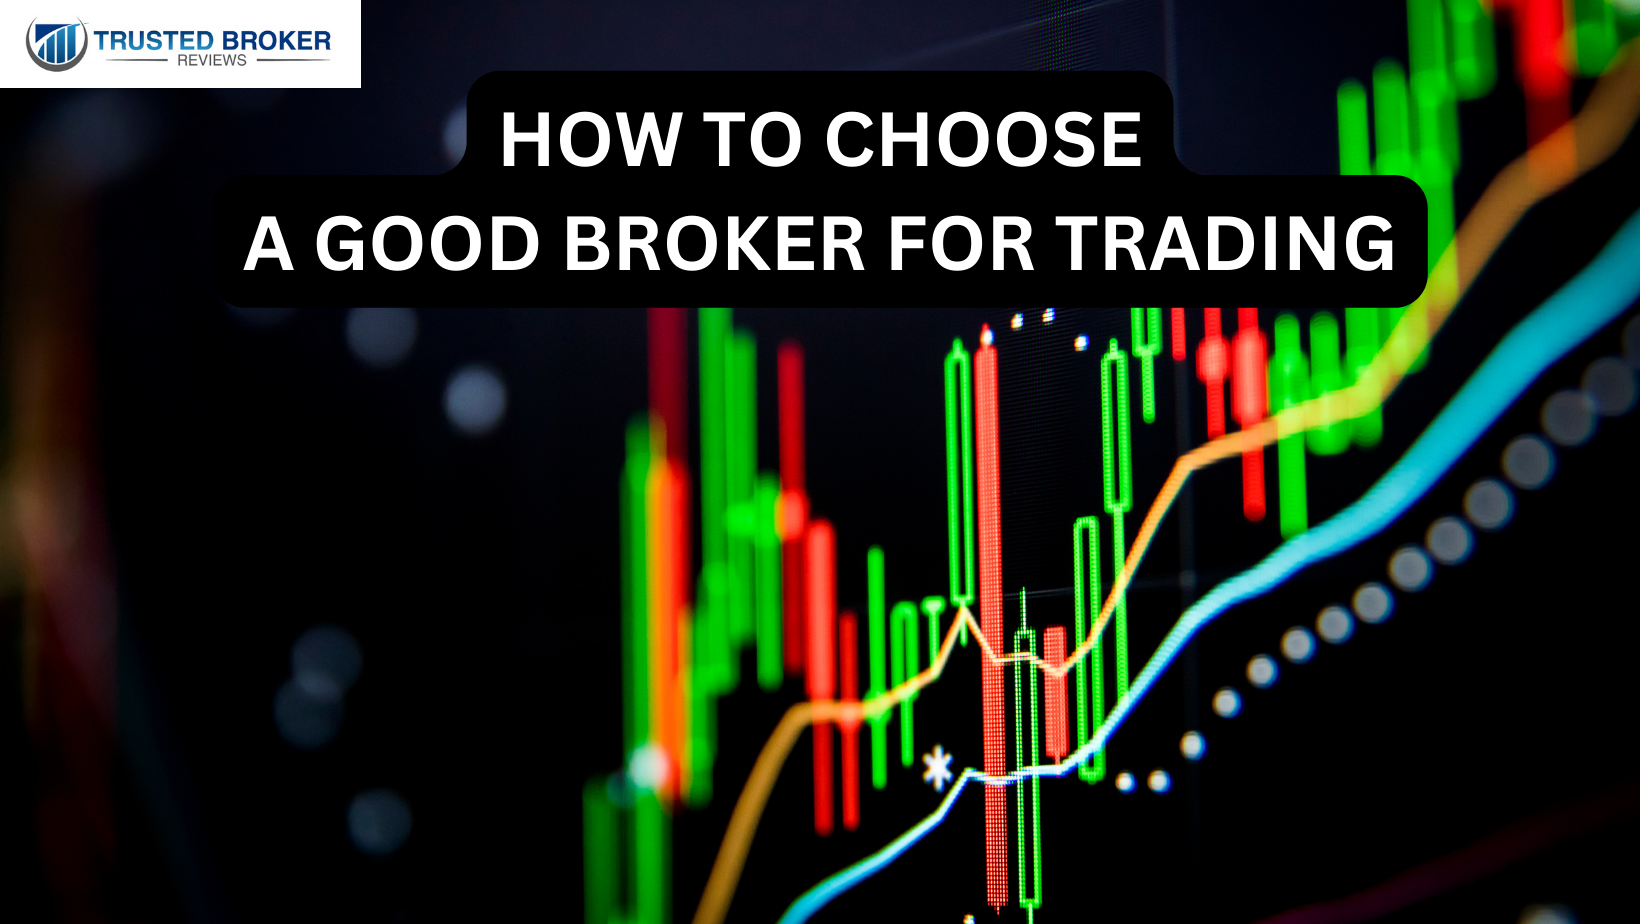 How to choose a good broker for trading